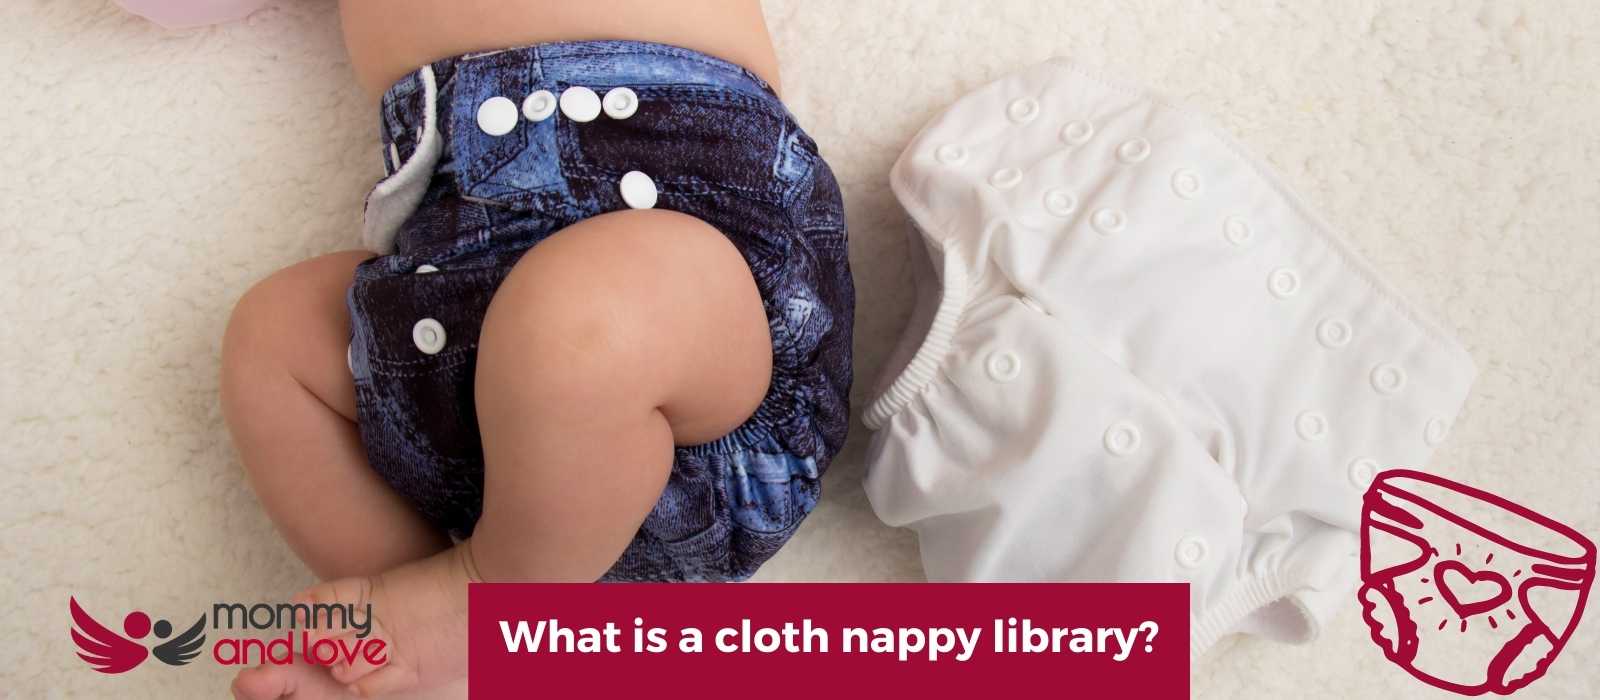 What is a cloth nappy library